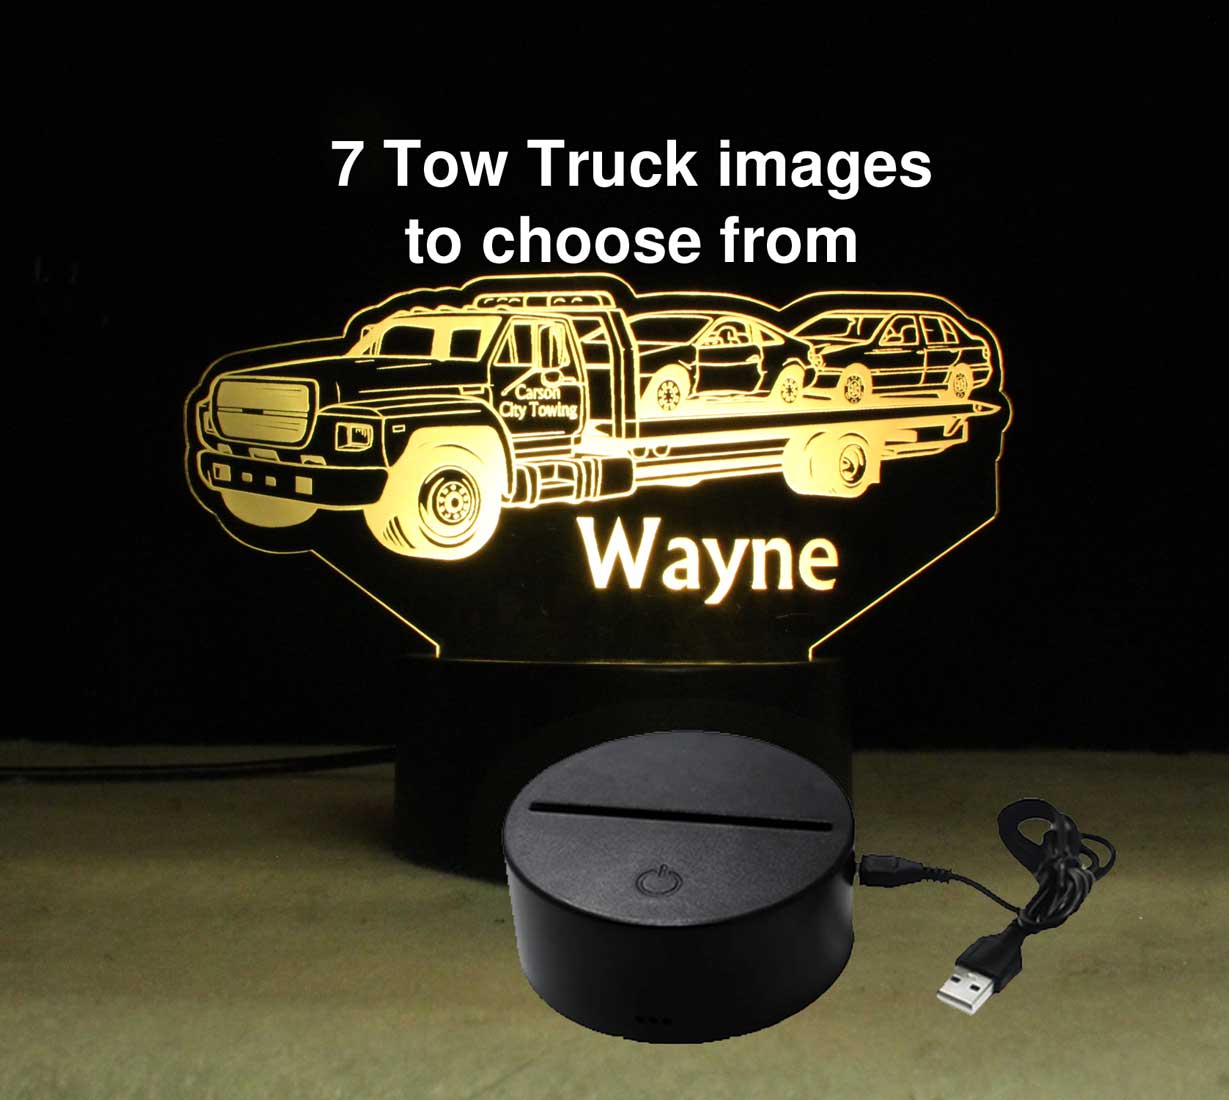 Personalized Tow Truck night light, USB/110V/240V battery operated